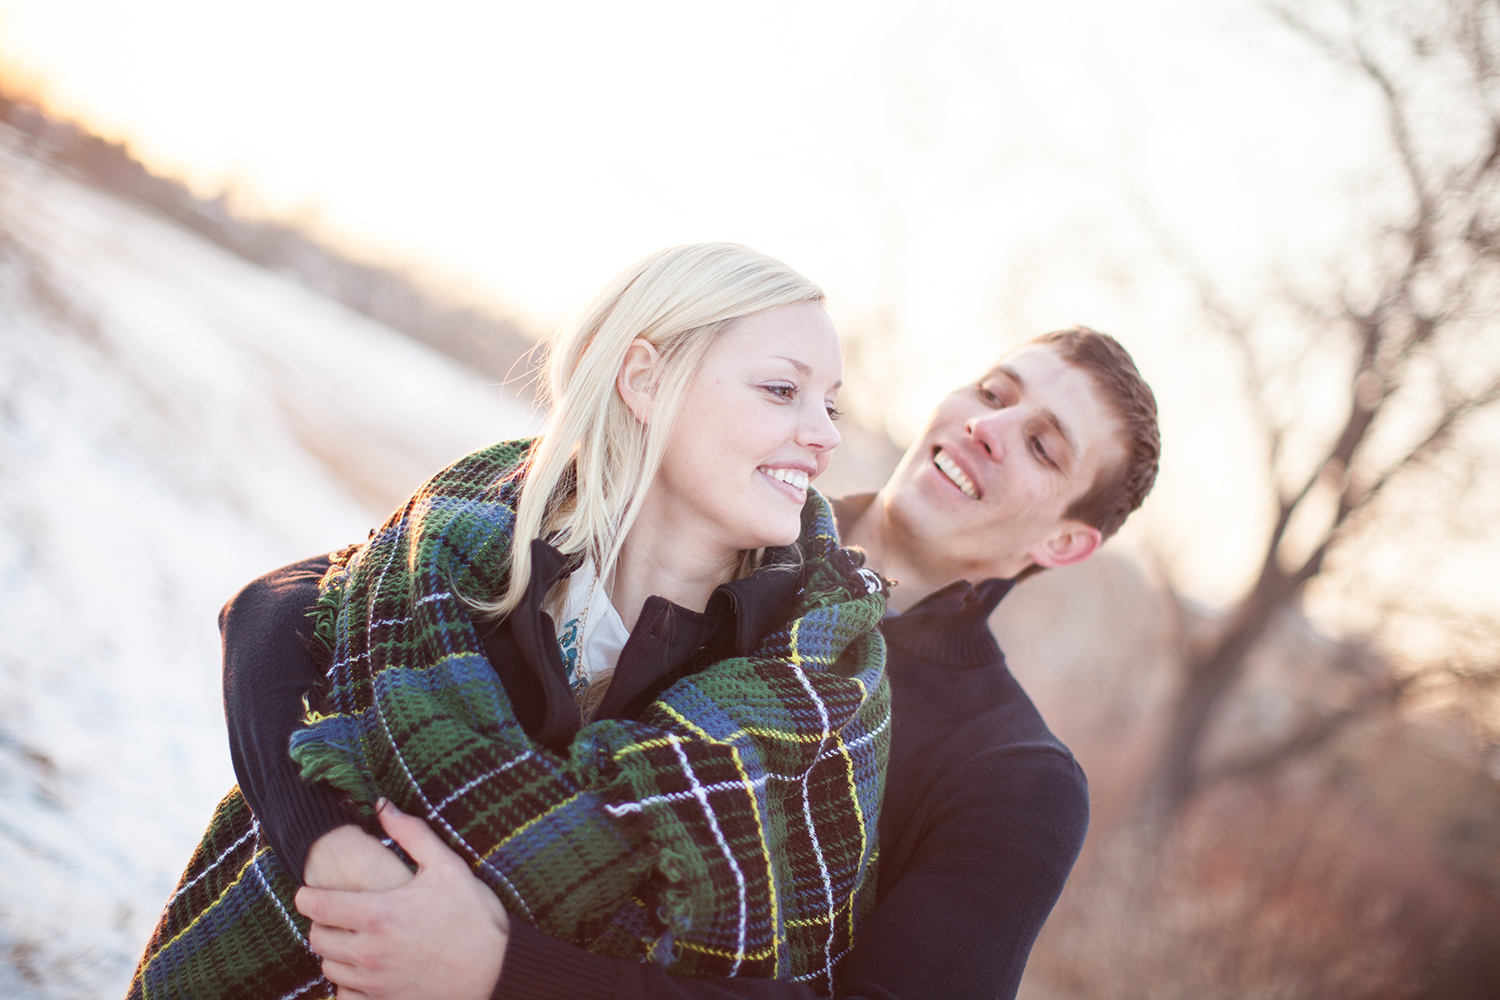 Grace Combs Photography - Colorado Winter Cabin Engagement Session